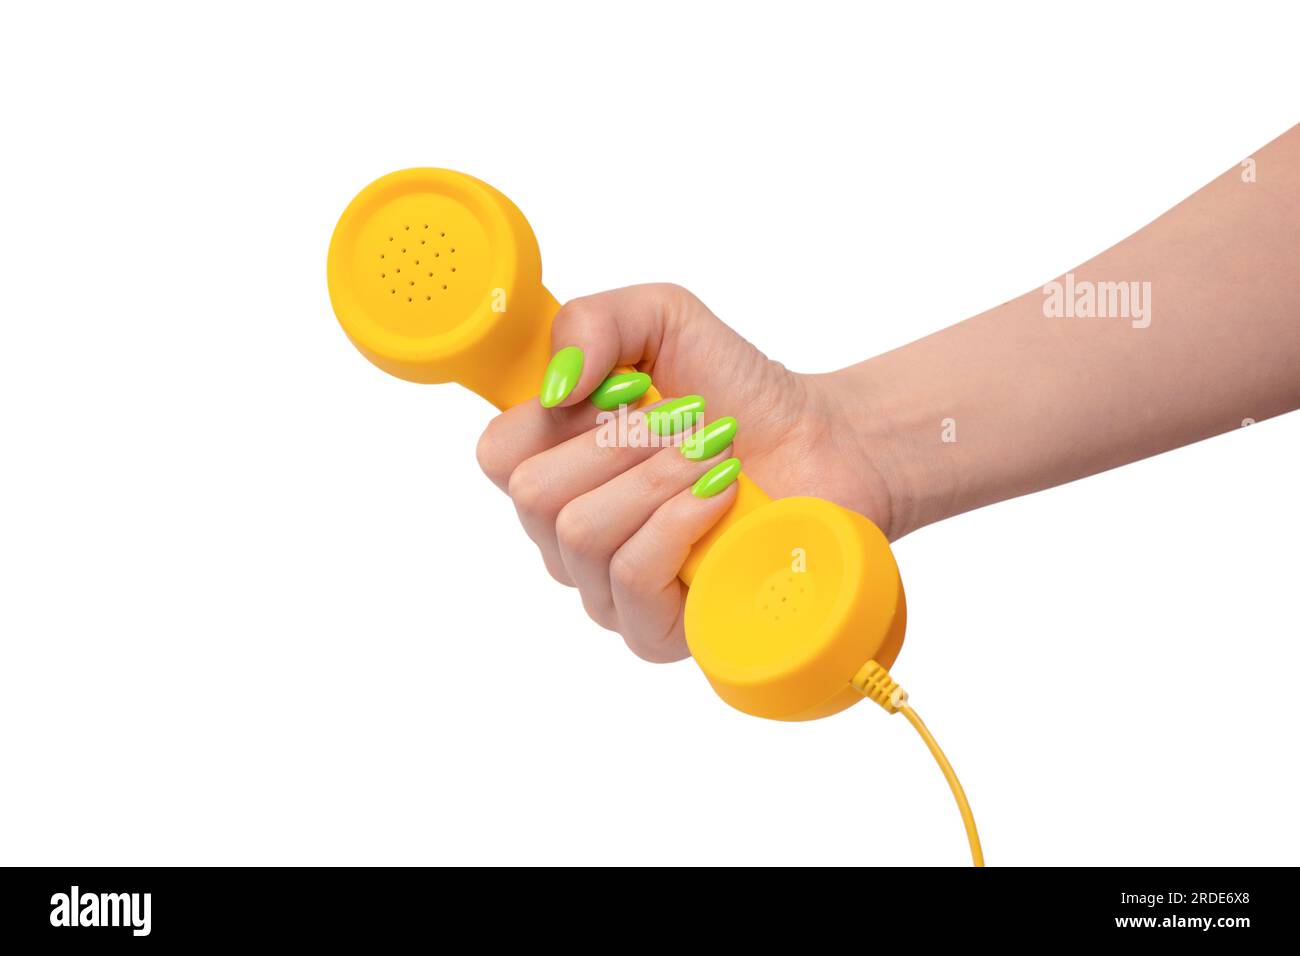 Yellow handset in woman hand with green nails isolated on a white background. Copy space. Stock Photo